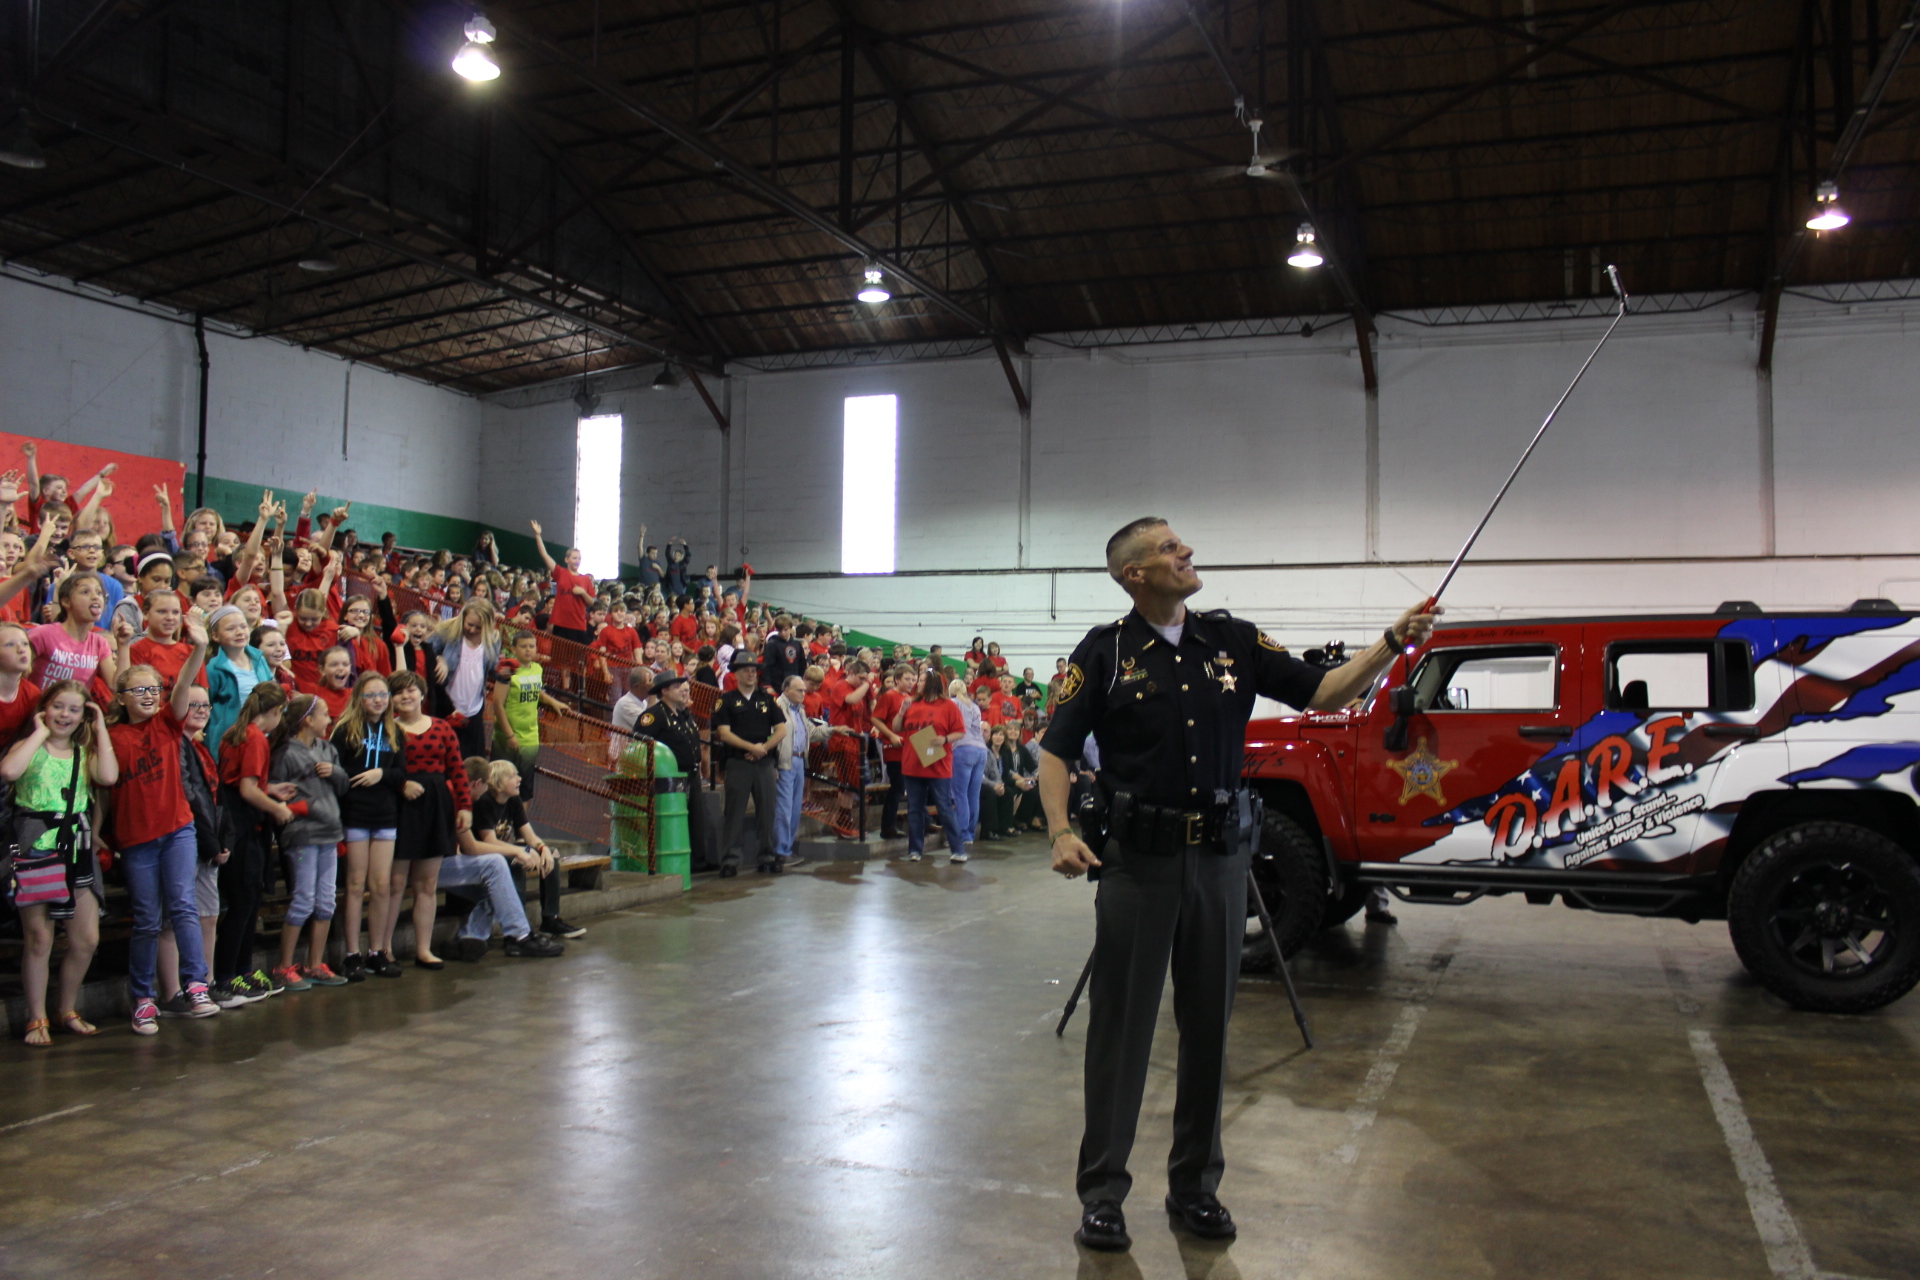 Deputy Thomas takes a selfie with the students beside the new D.A.R.E Hummer 